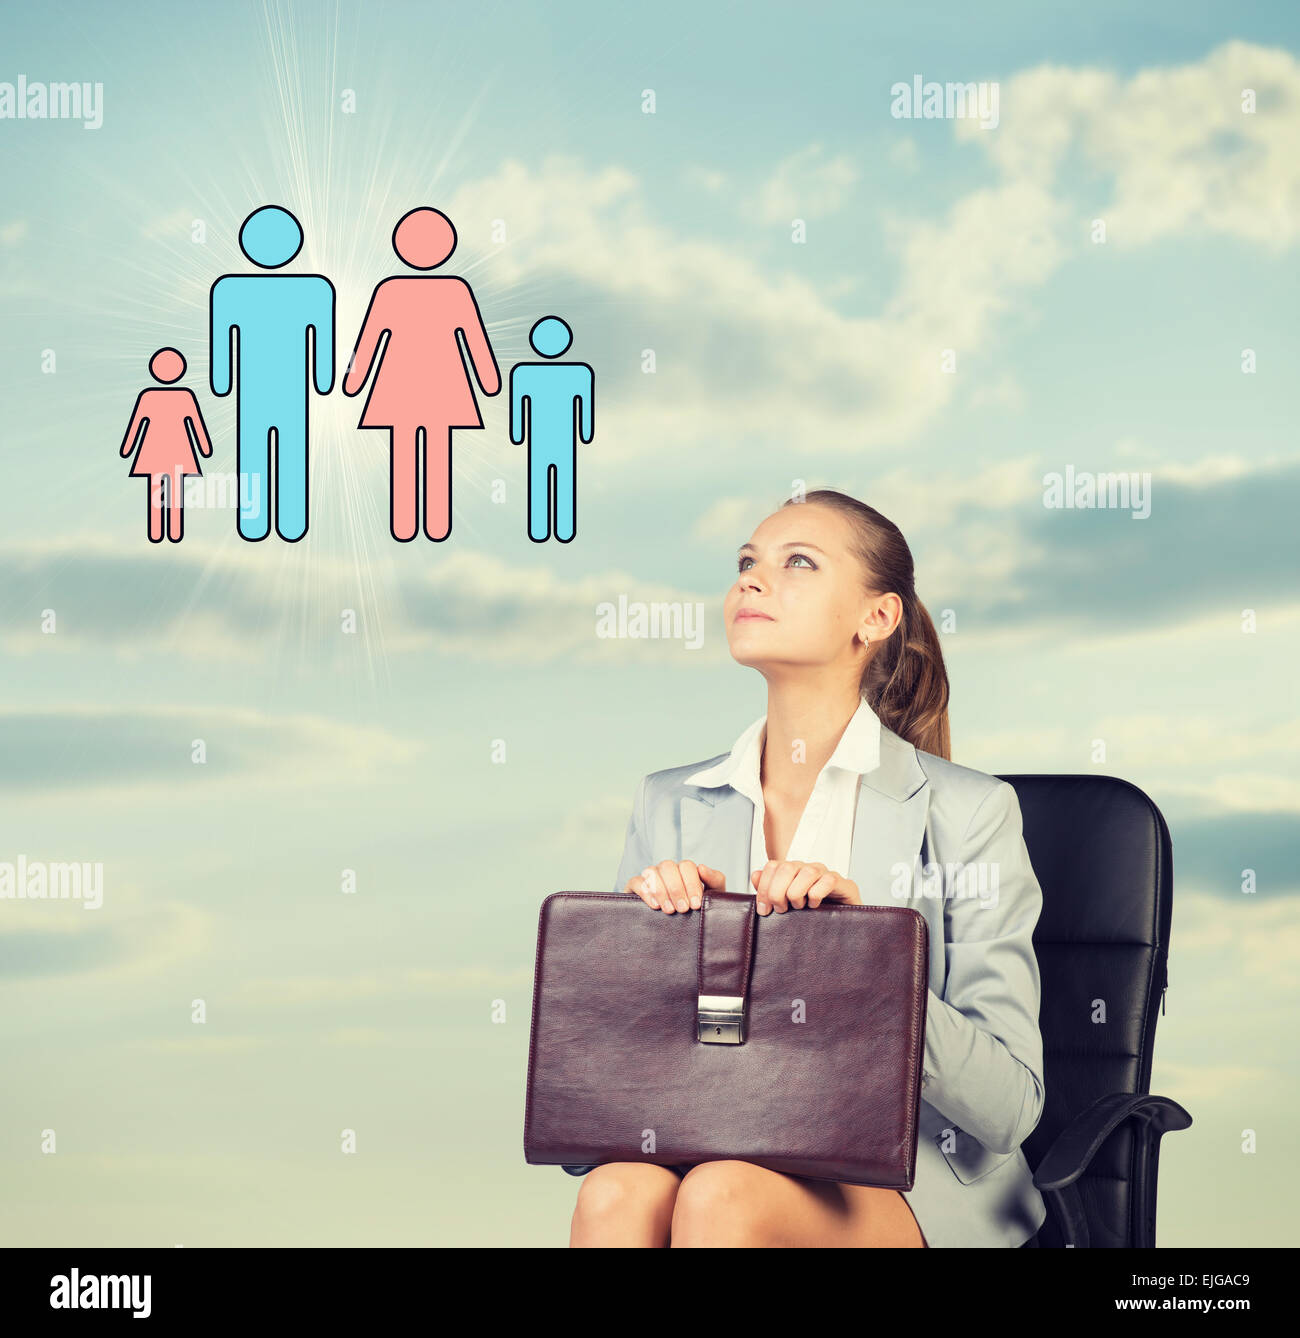 Business woman in skirt, blouse and jacket, sitting on chair imagines family. Against background of sky, clouds Stock Photo